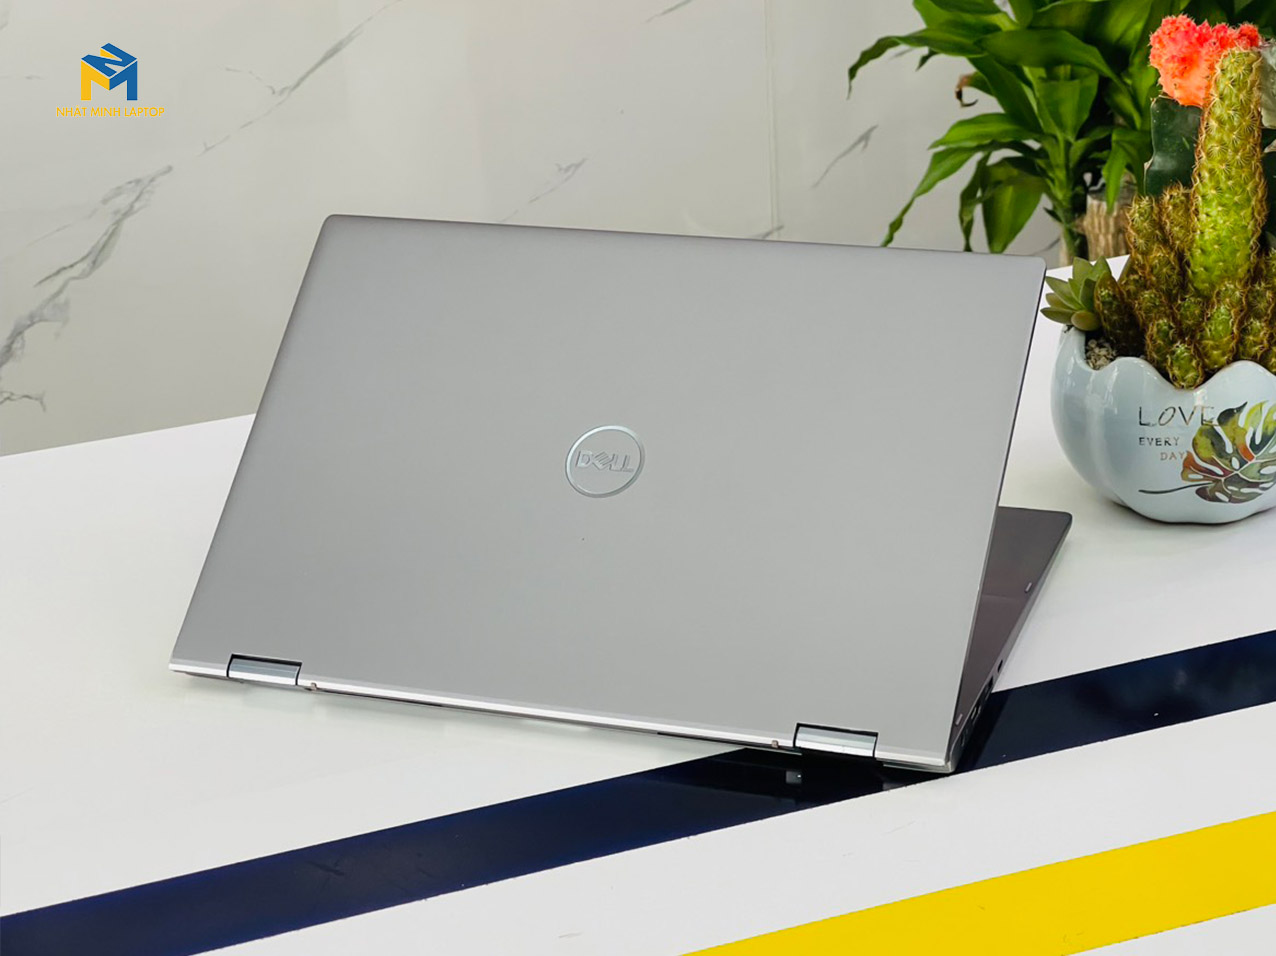 Dell Inspiron 14 5400 2-in-1 i7-1065G7 16GB 512GB 14" FHD Touch